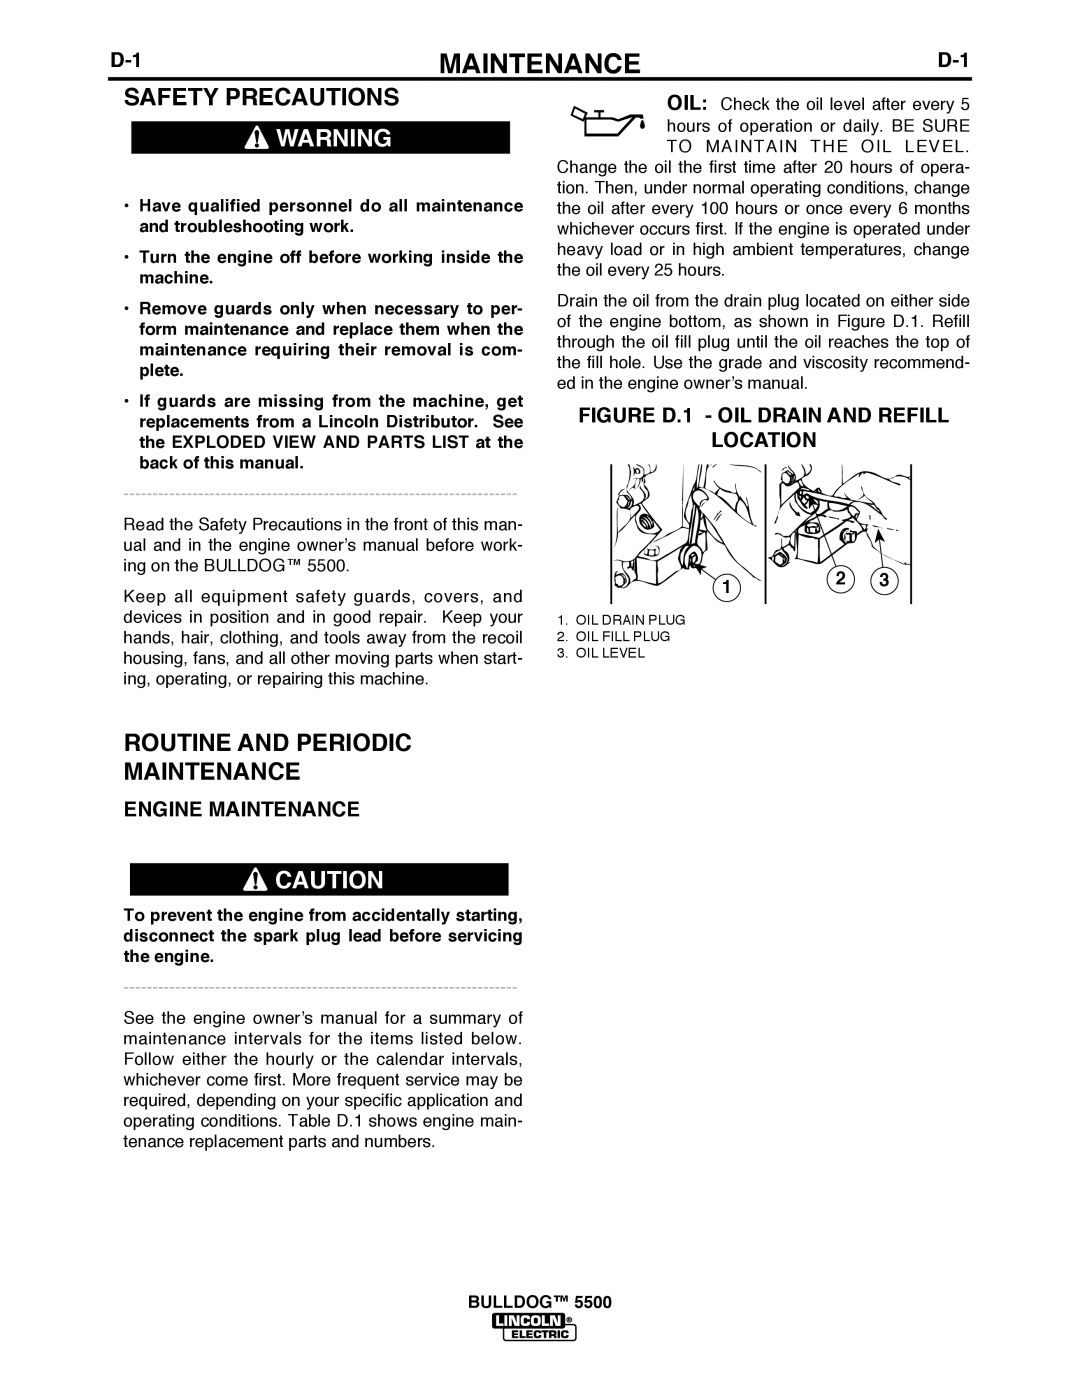 Lincoln Electric IM10074 manual Routine And Periodic Maintenance, Safety Precautions, bULLDOG 